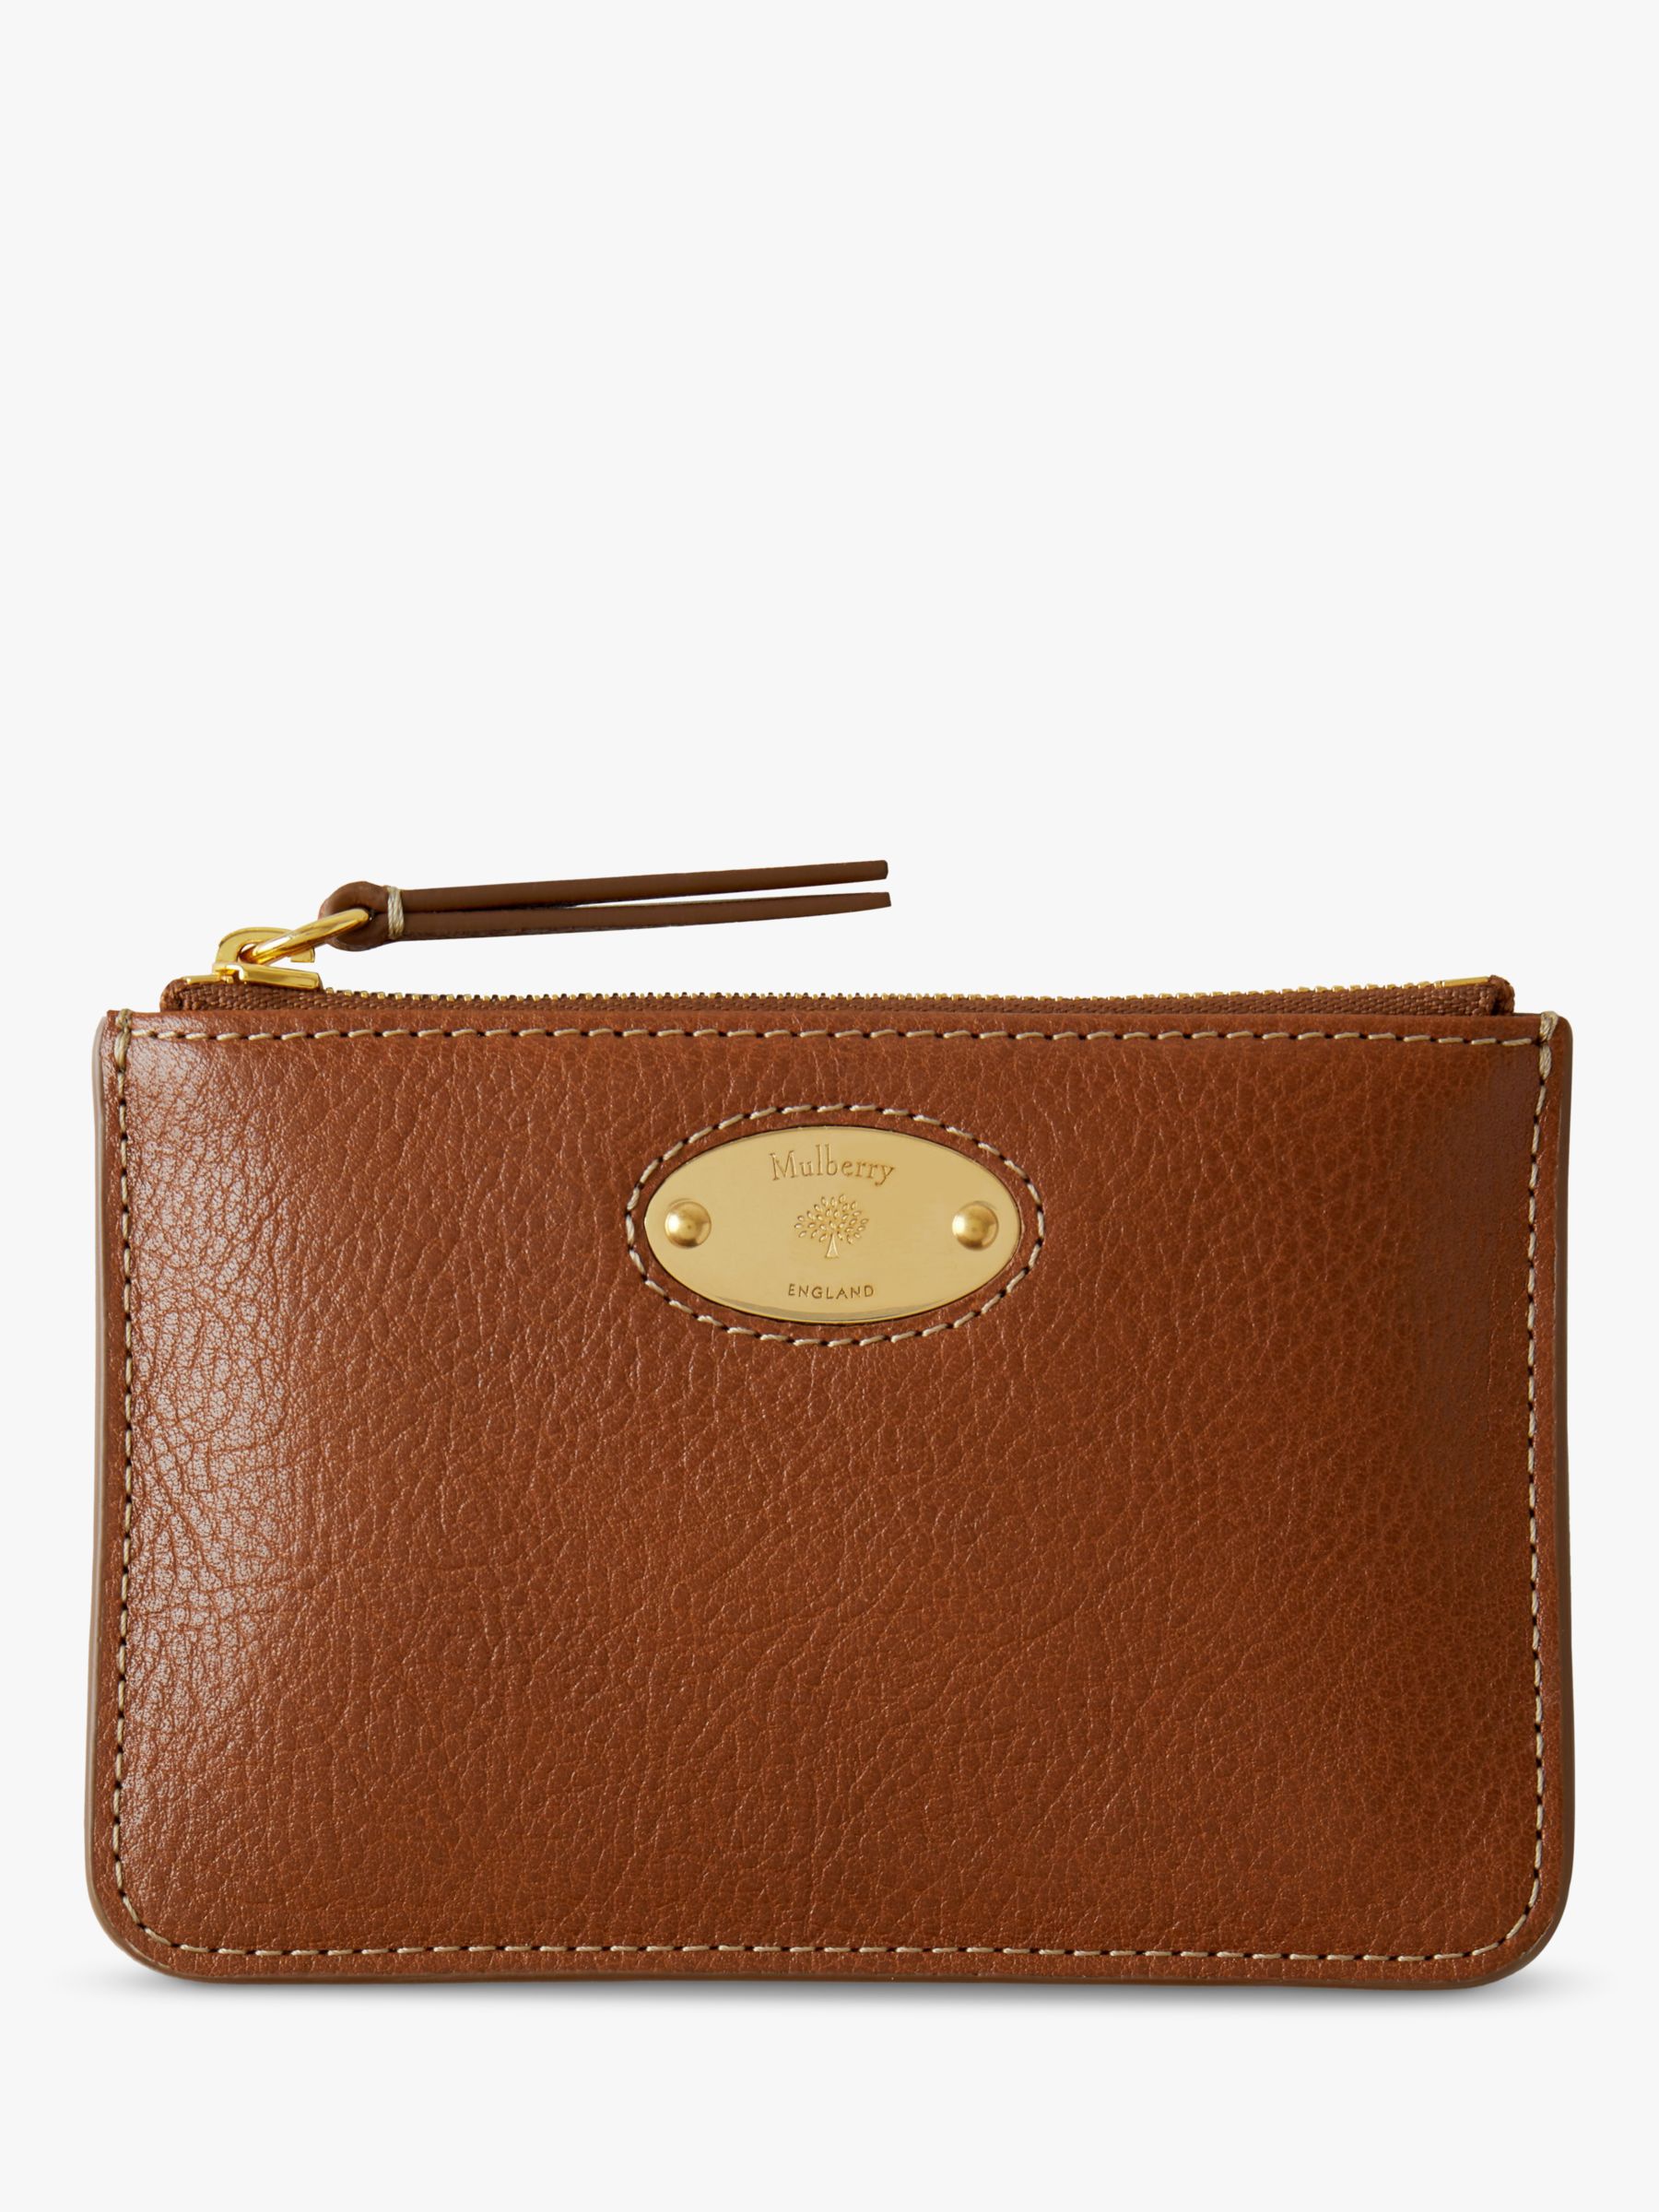 Buy Mulberry Plaque Legacy Natural Vegetable Tan Leather Zip Top Coin Pouch, Oak Online at johnlewis.com